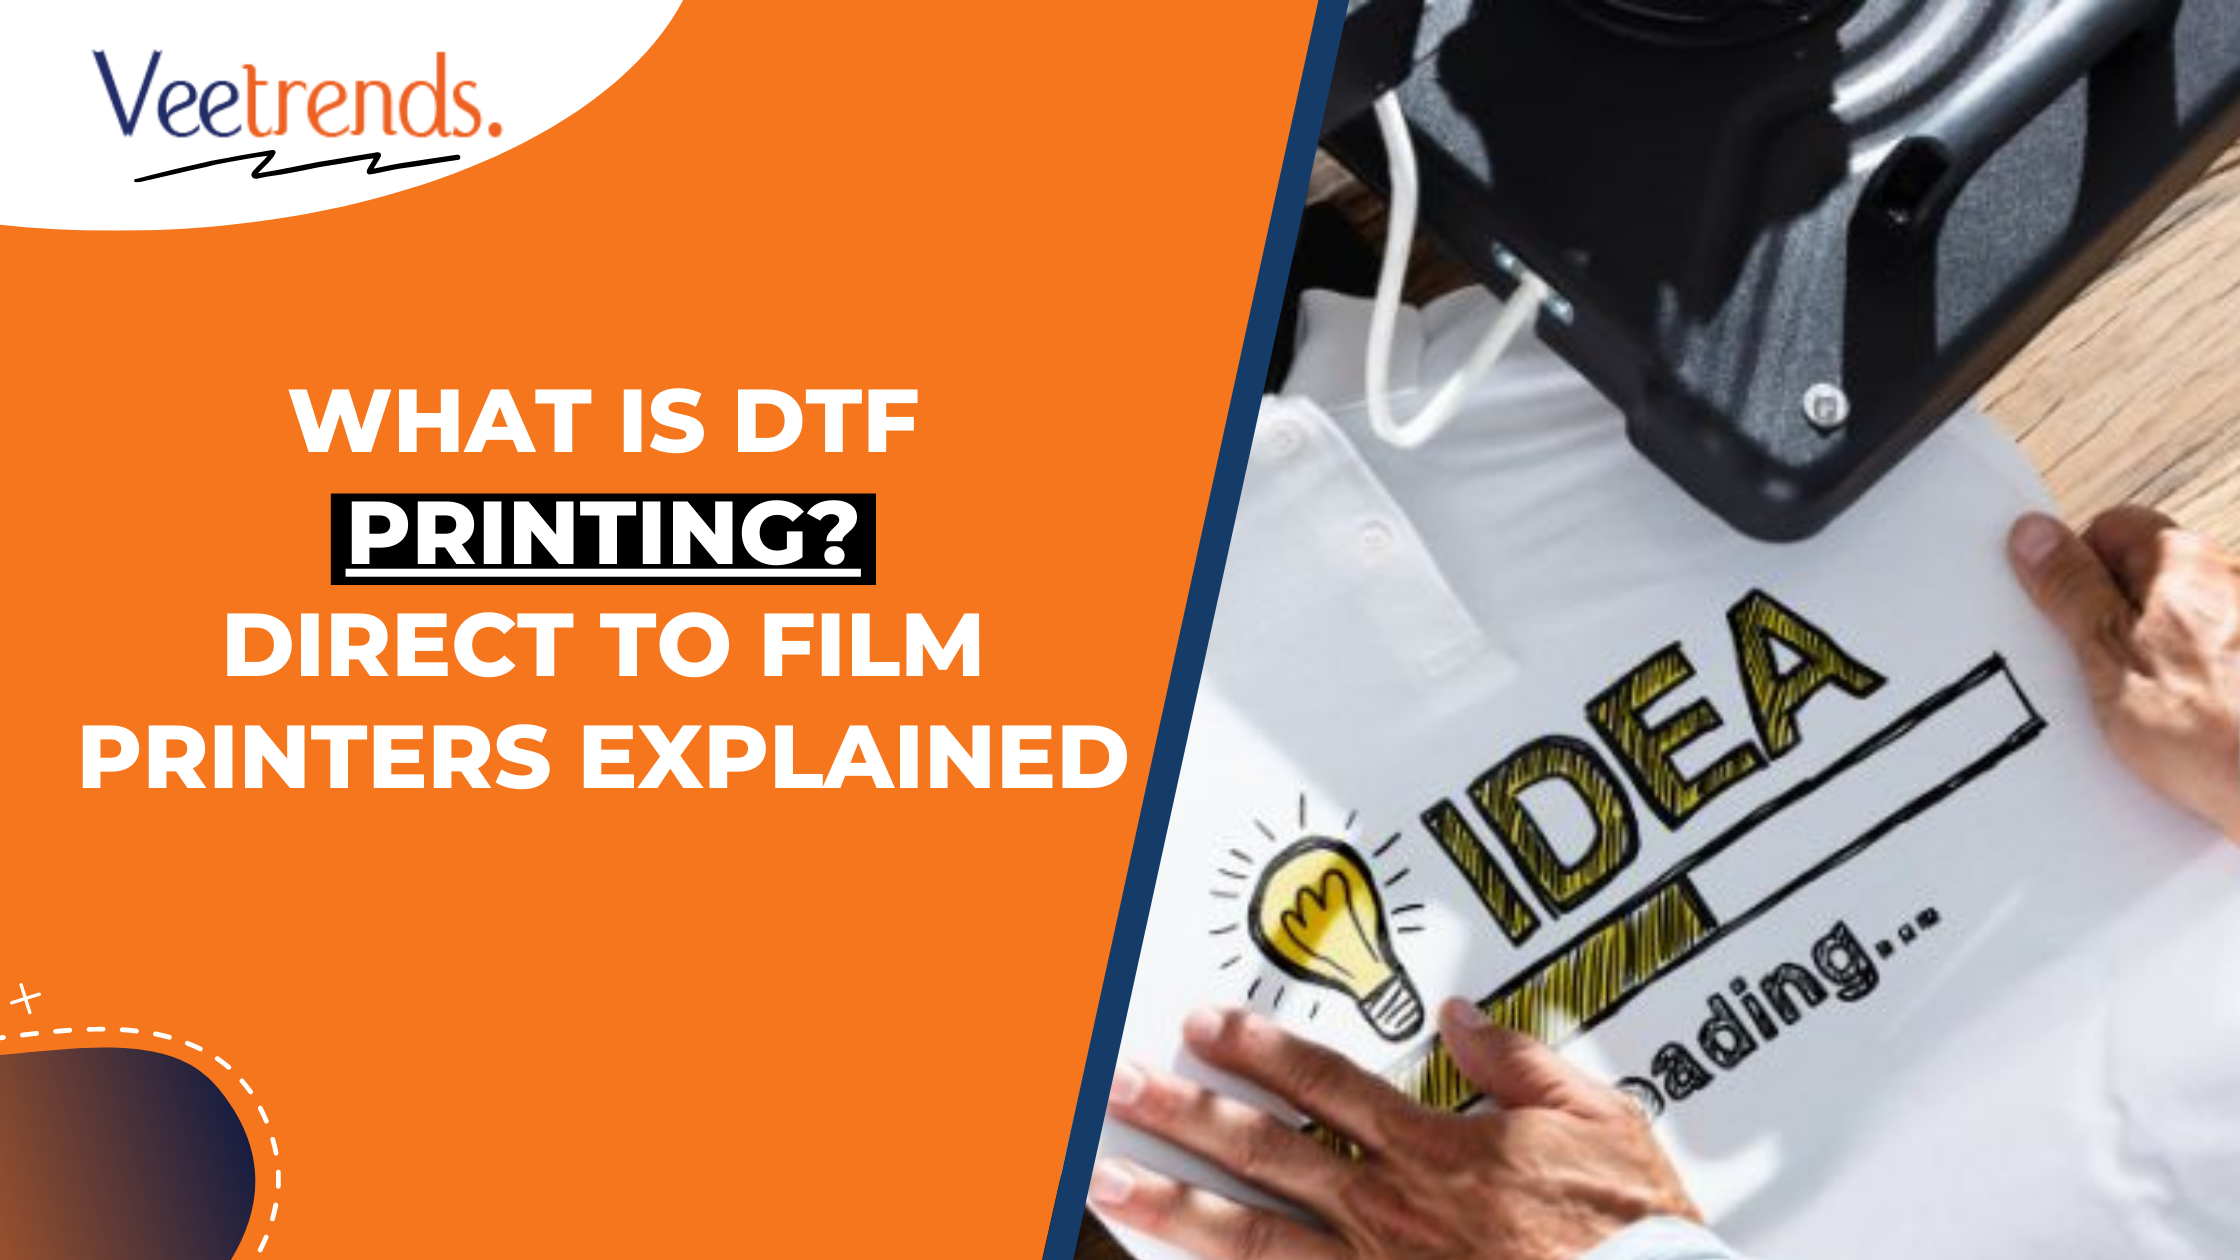 How to Do DTF Printing with Sublimation ink? [Case Study] - DTF